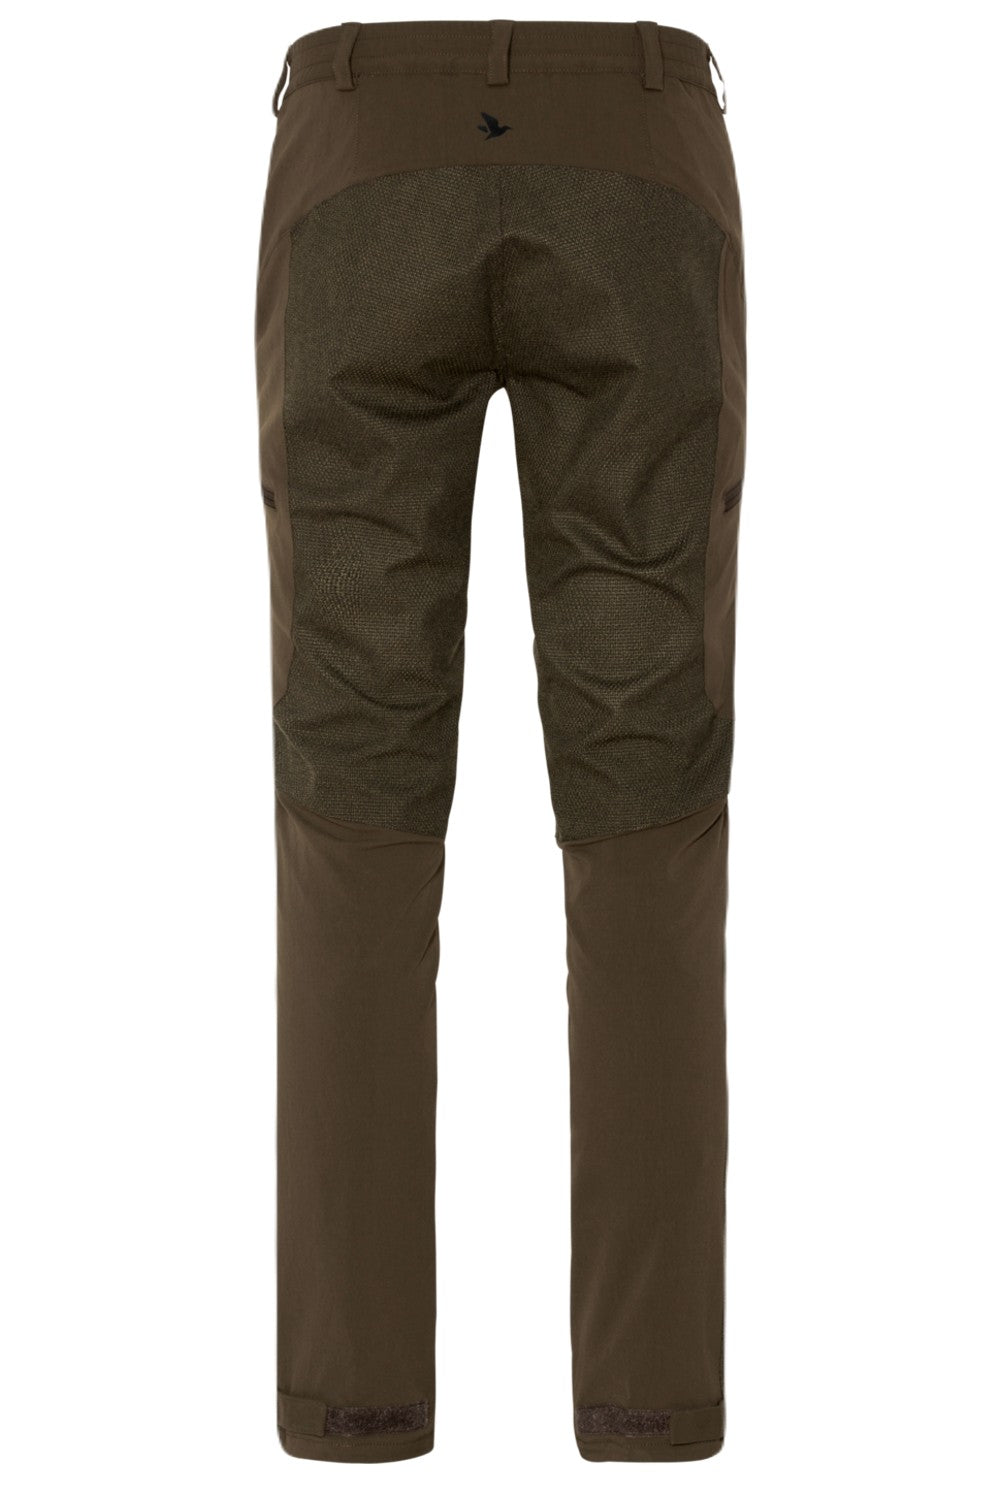 Seeland Womens Larch Membrane Trousers in Pine Green